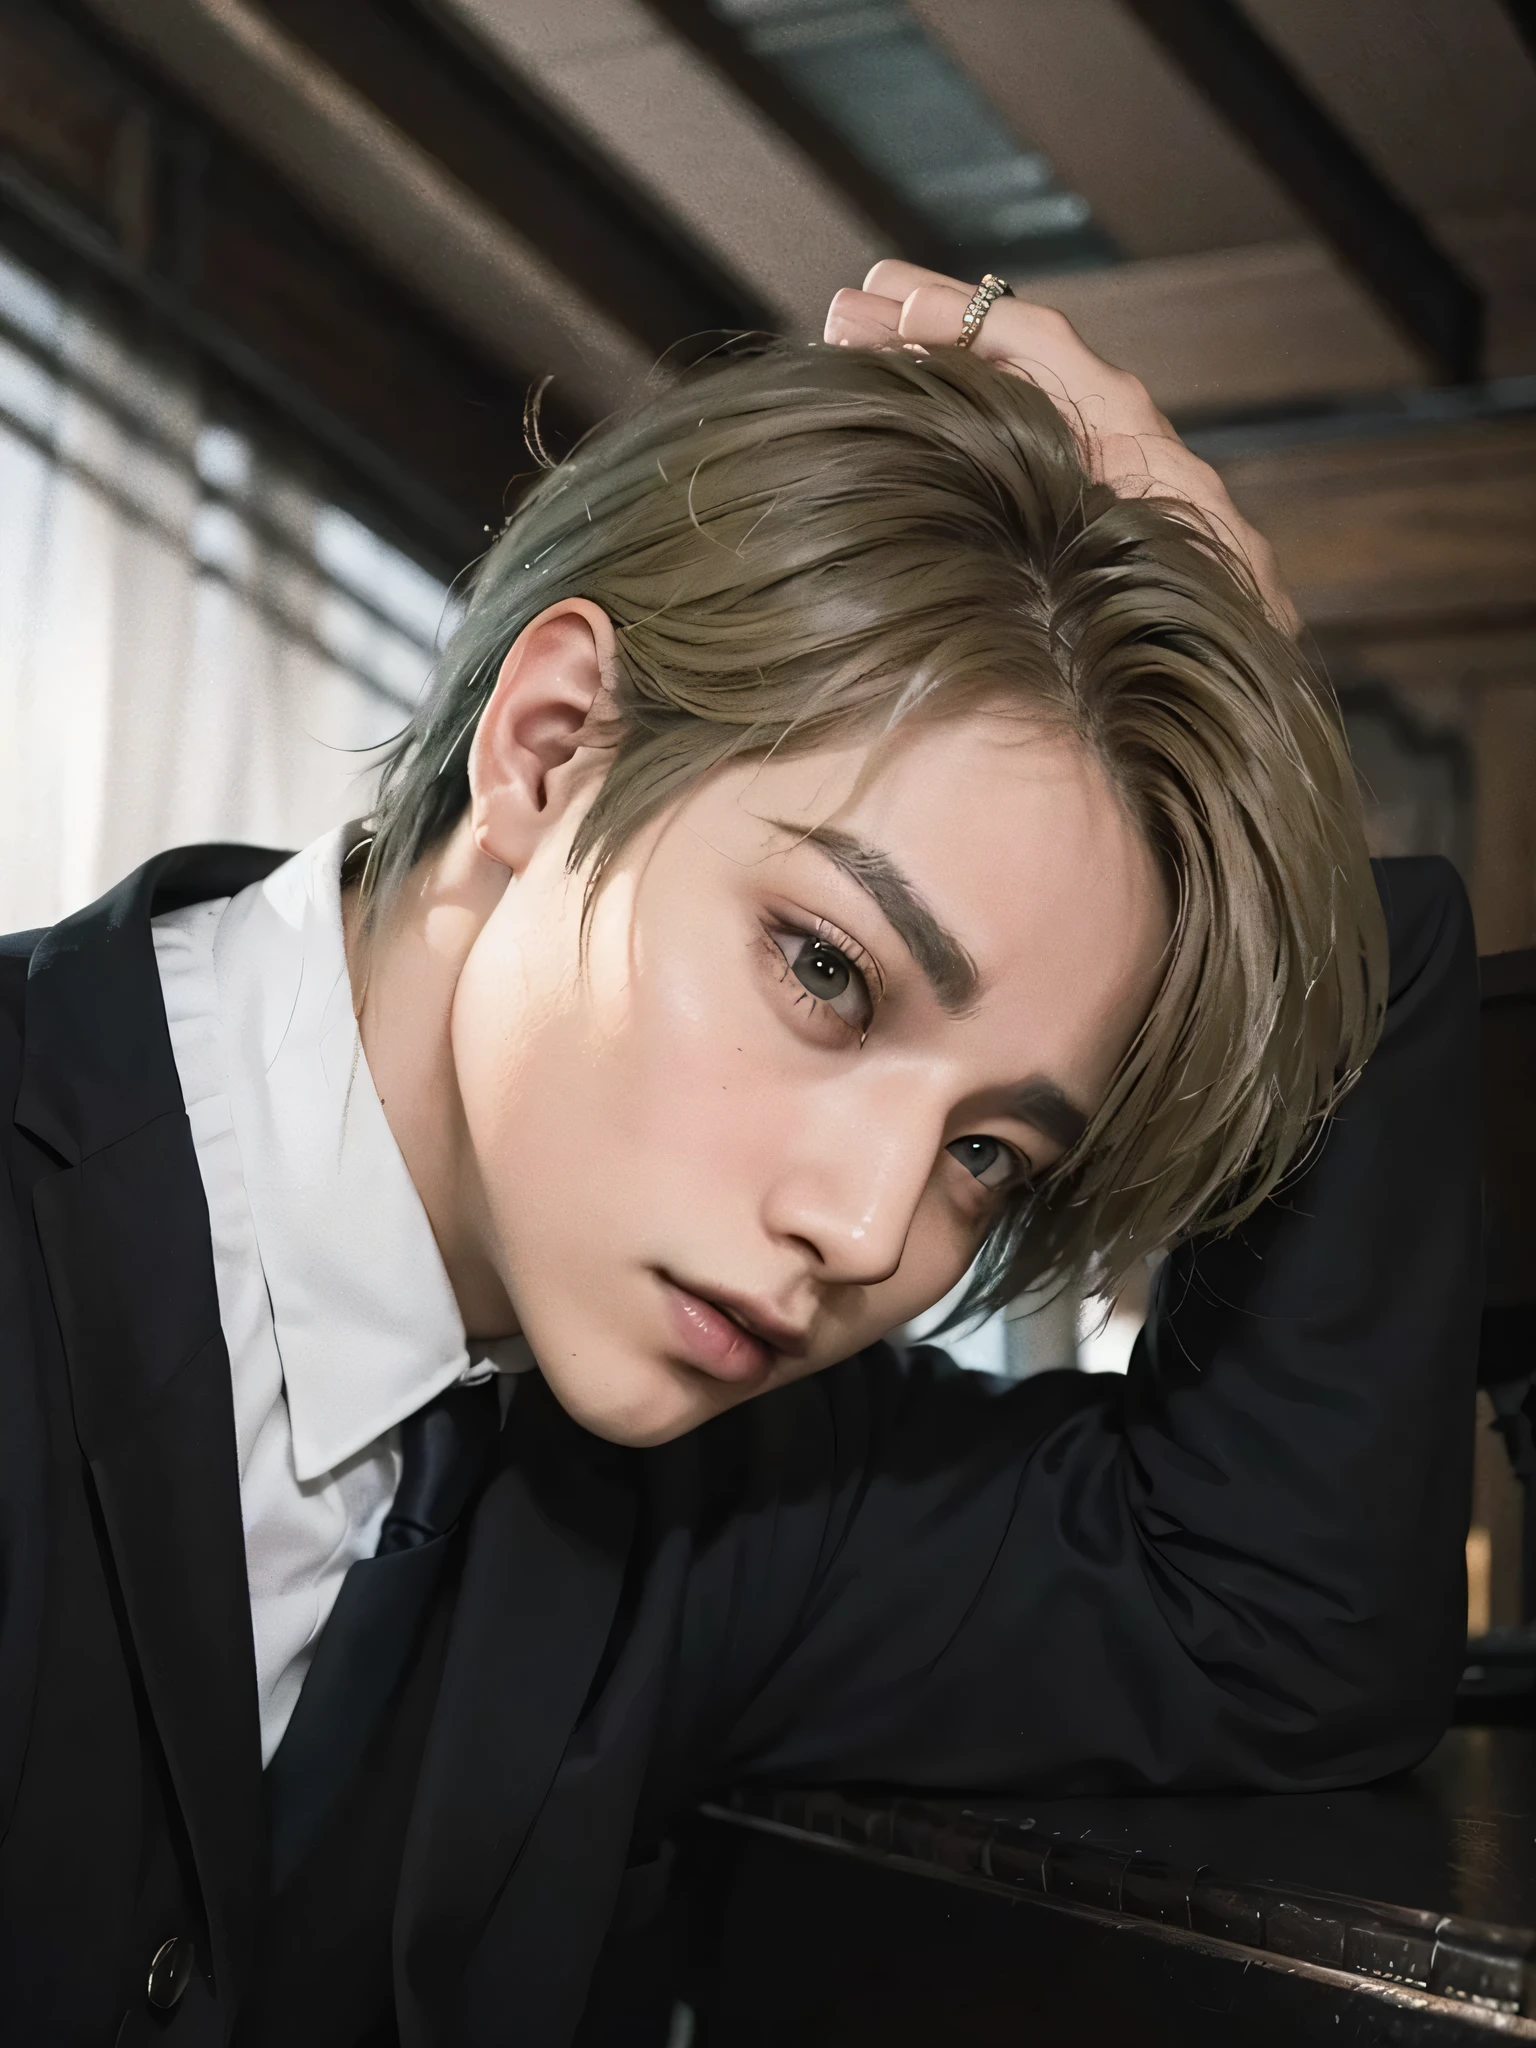 There is a man in a suit and tie leaning on a piano, kpop idol portrait, Cai Xu Kun, jungkook, Juan Liebert mixed with alucard, Juan Liebert, hyung tae, kim taejin, Portrait of Blackpink&#39;s Jossi, xqc, Jimin, art album, jimin park, with short hair, inspired by jeonseok lee